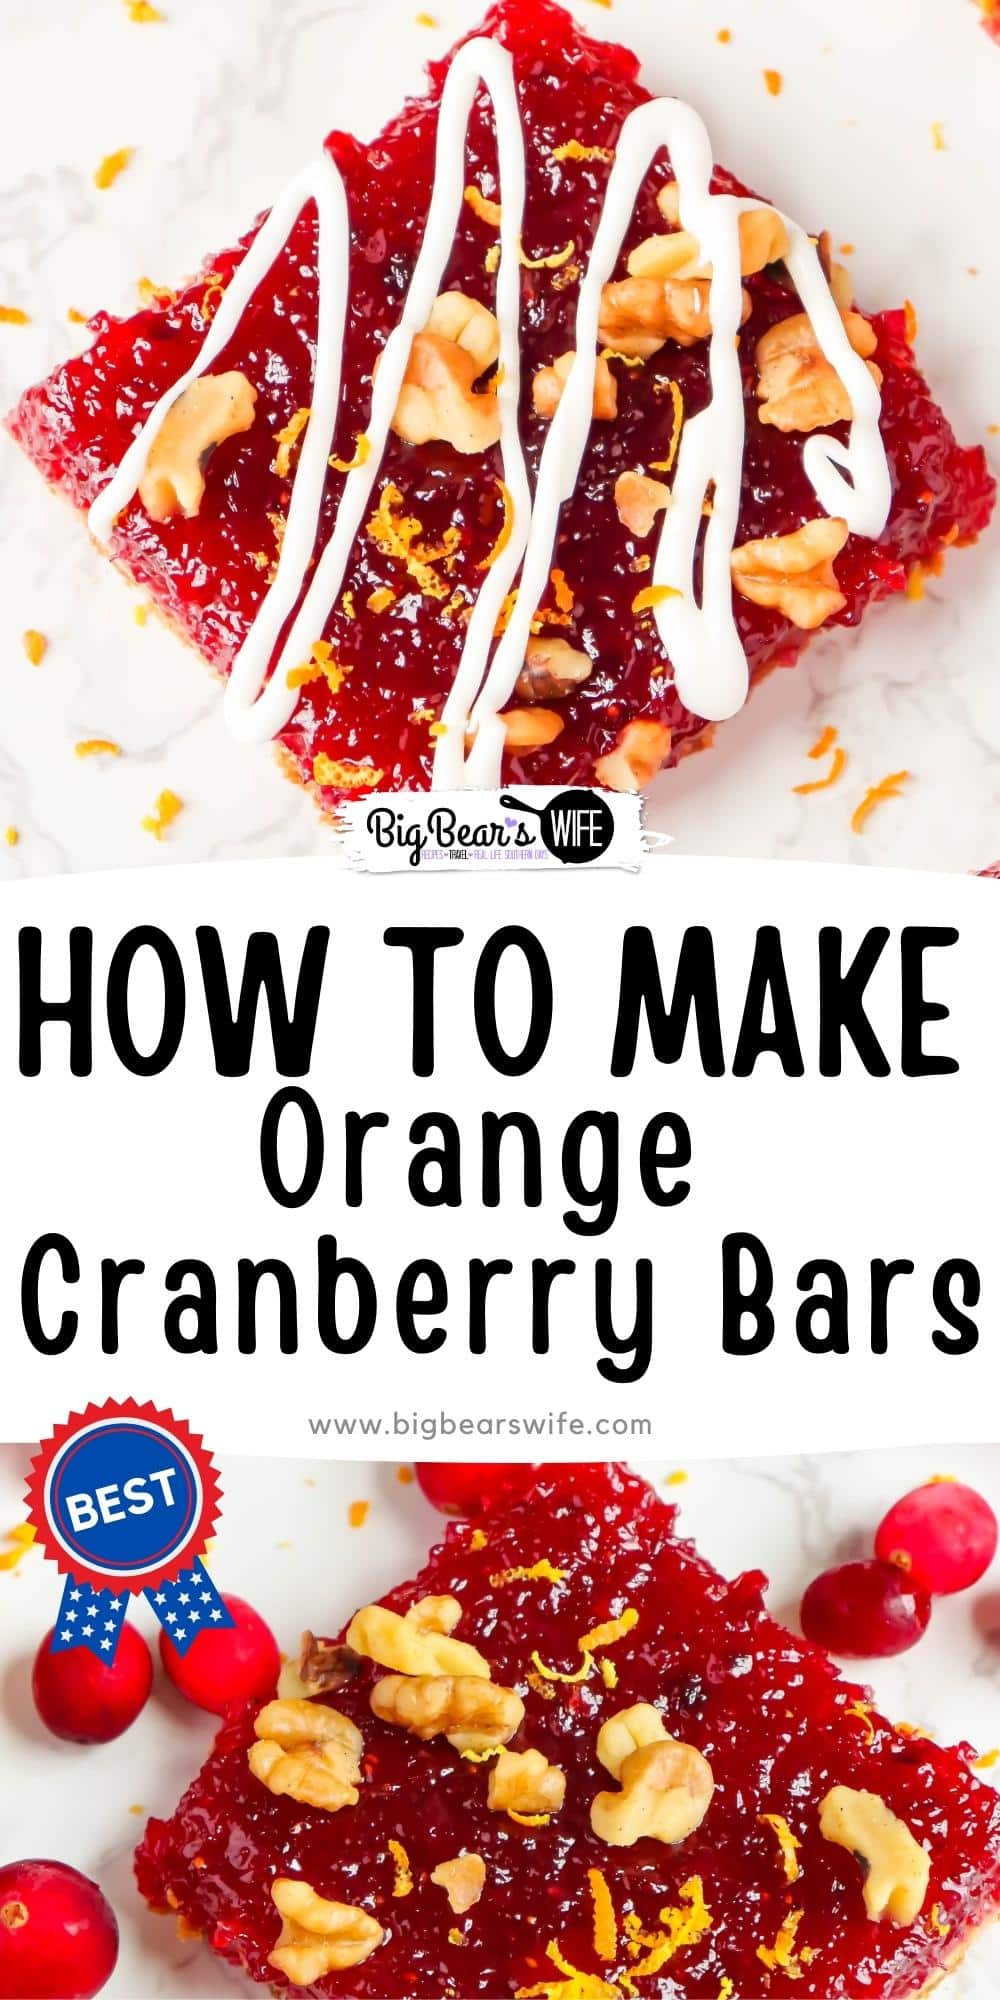 These tart Cranberry Orange Bars are perfect for the holidays! Made with fresh cranberries and oranges over a vanilla cookie crust. These bars are perfect when topped with walnuts, orange zest and a vanilla icing drizzle.  via @bigbearswife